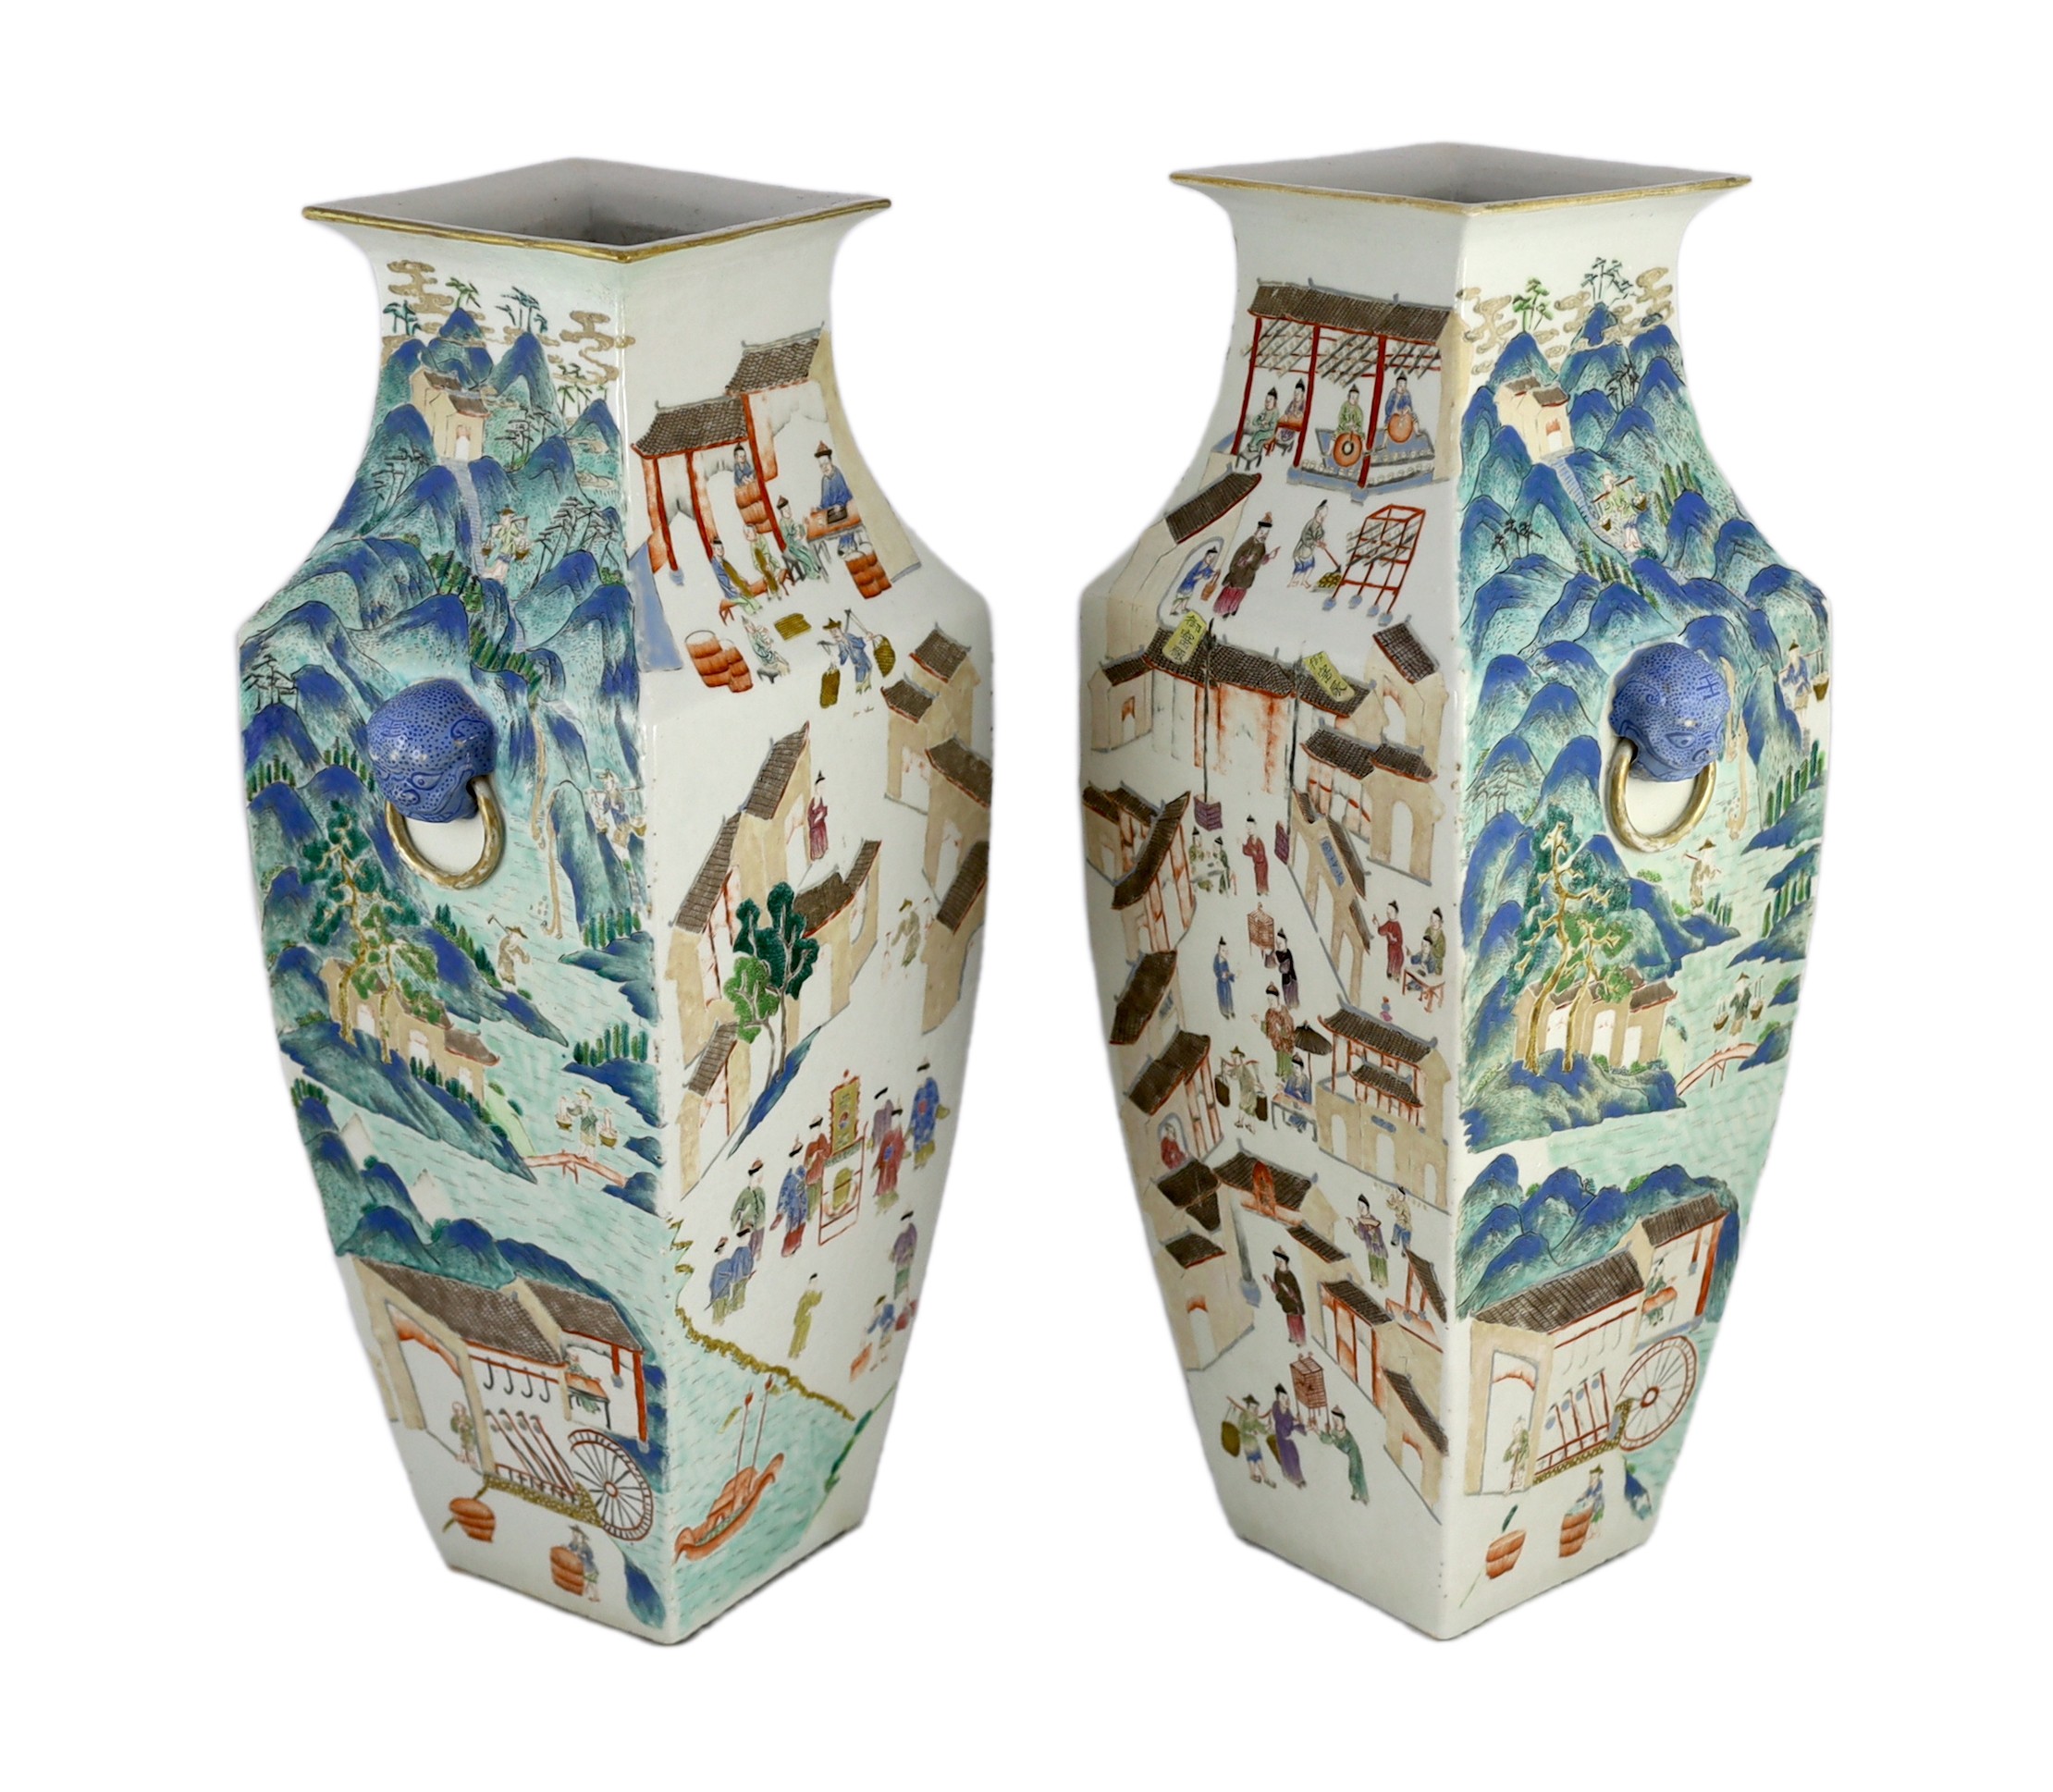 A pair of large Chinese famille rose fencai square baluster vases, 19th century, 53cm high, one corner of rim restored, some wear to enamels                                                                                